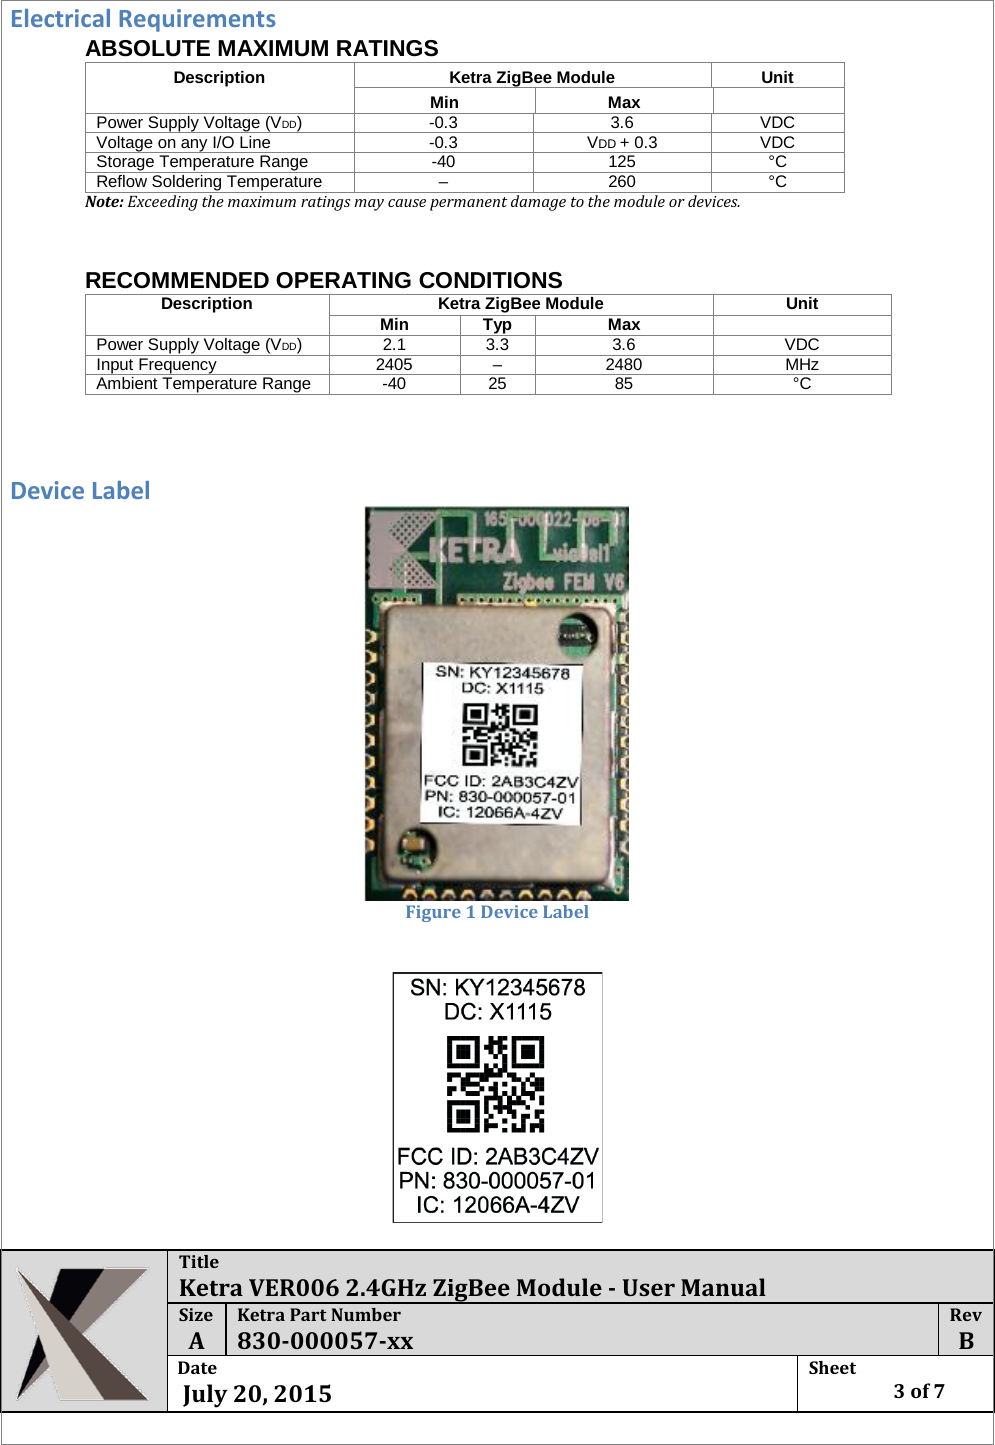  Title Ketra VER006 2.4GHz ZigBee Module - User Manual Size  A Ketra Part Number 830-000057-xx Rev  B Date   July 20, 2015 Sheet    3 of 7  Electrical Requirements ABSOLUTE MAXIMUM RATINGS Description  Ketra ZigBee Module  Unit  Min  Max   Power Supply Voltage (VDD)  -0.3  3.6  VDC  Voltage on any I/O Line  -0.3  VDD + 0.3  VDC  Storage Temperature Range  -40  125  °C  Reflow Soldering Temperature  –  260  °C  Note: Exceeding the maximum ratings may cause permanent damage to the module or devices.      RECOMMENDED OPERATING CONDITIONS  Description  Ketra ZigBee Module Unit  Min  Typ  Max   Power Supply Voltage (VDD)  2.1  3.3  3.6  VDC  Input Frequency  2405  –  2480  MHz  Ambient Temperature Range  -40  25  85  °C    Device Label  Figure 1 Device Label   